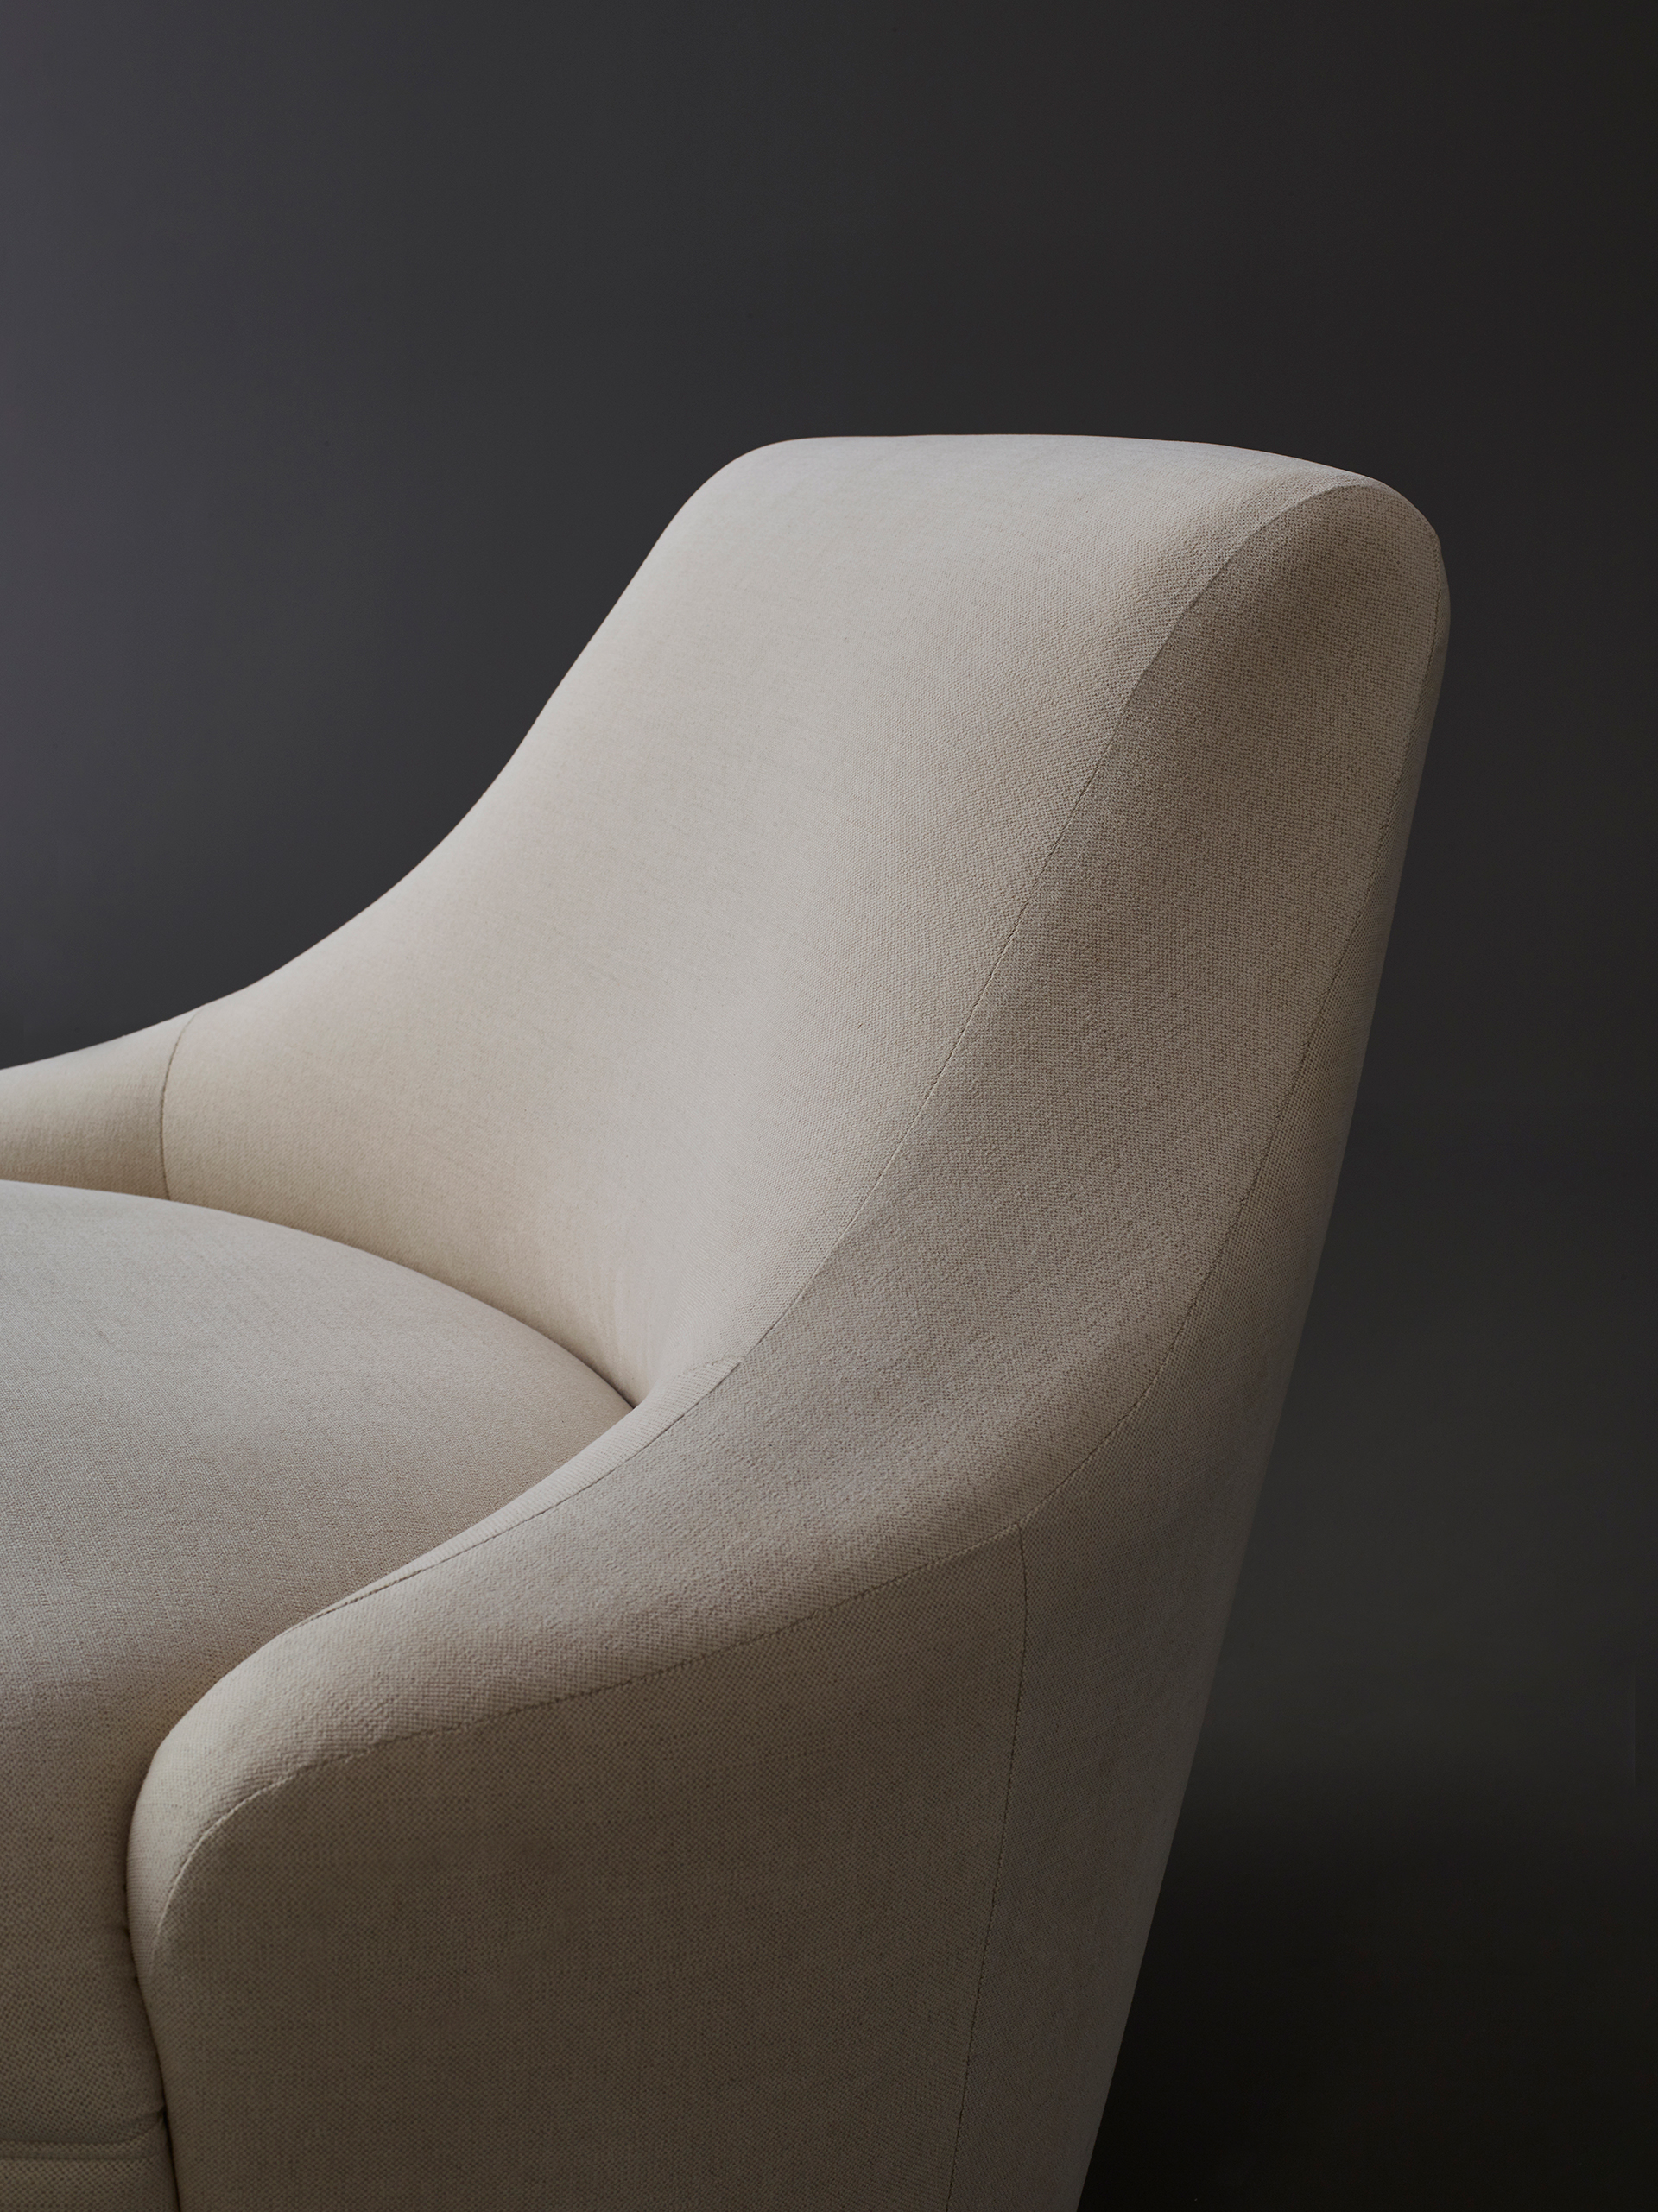 Gioconda and Giocondina are two fabric armchairs available with leather details, from Promemoria's catalogue | Promemoria